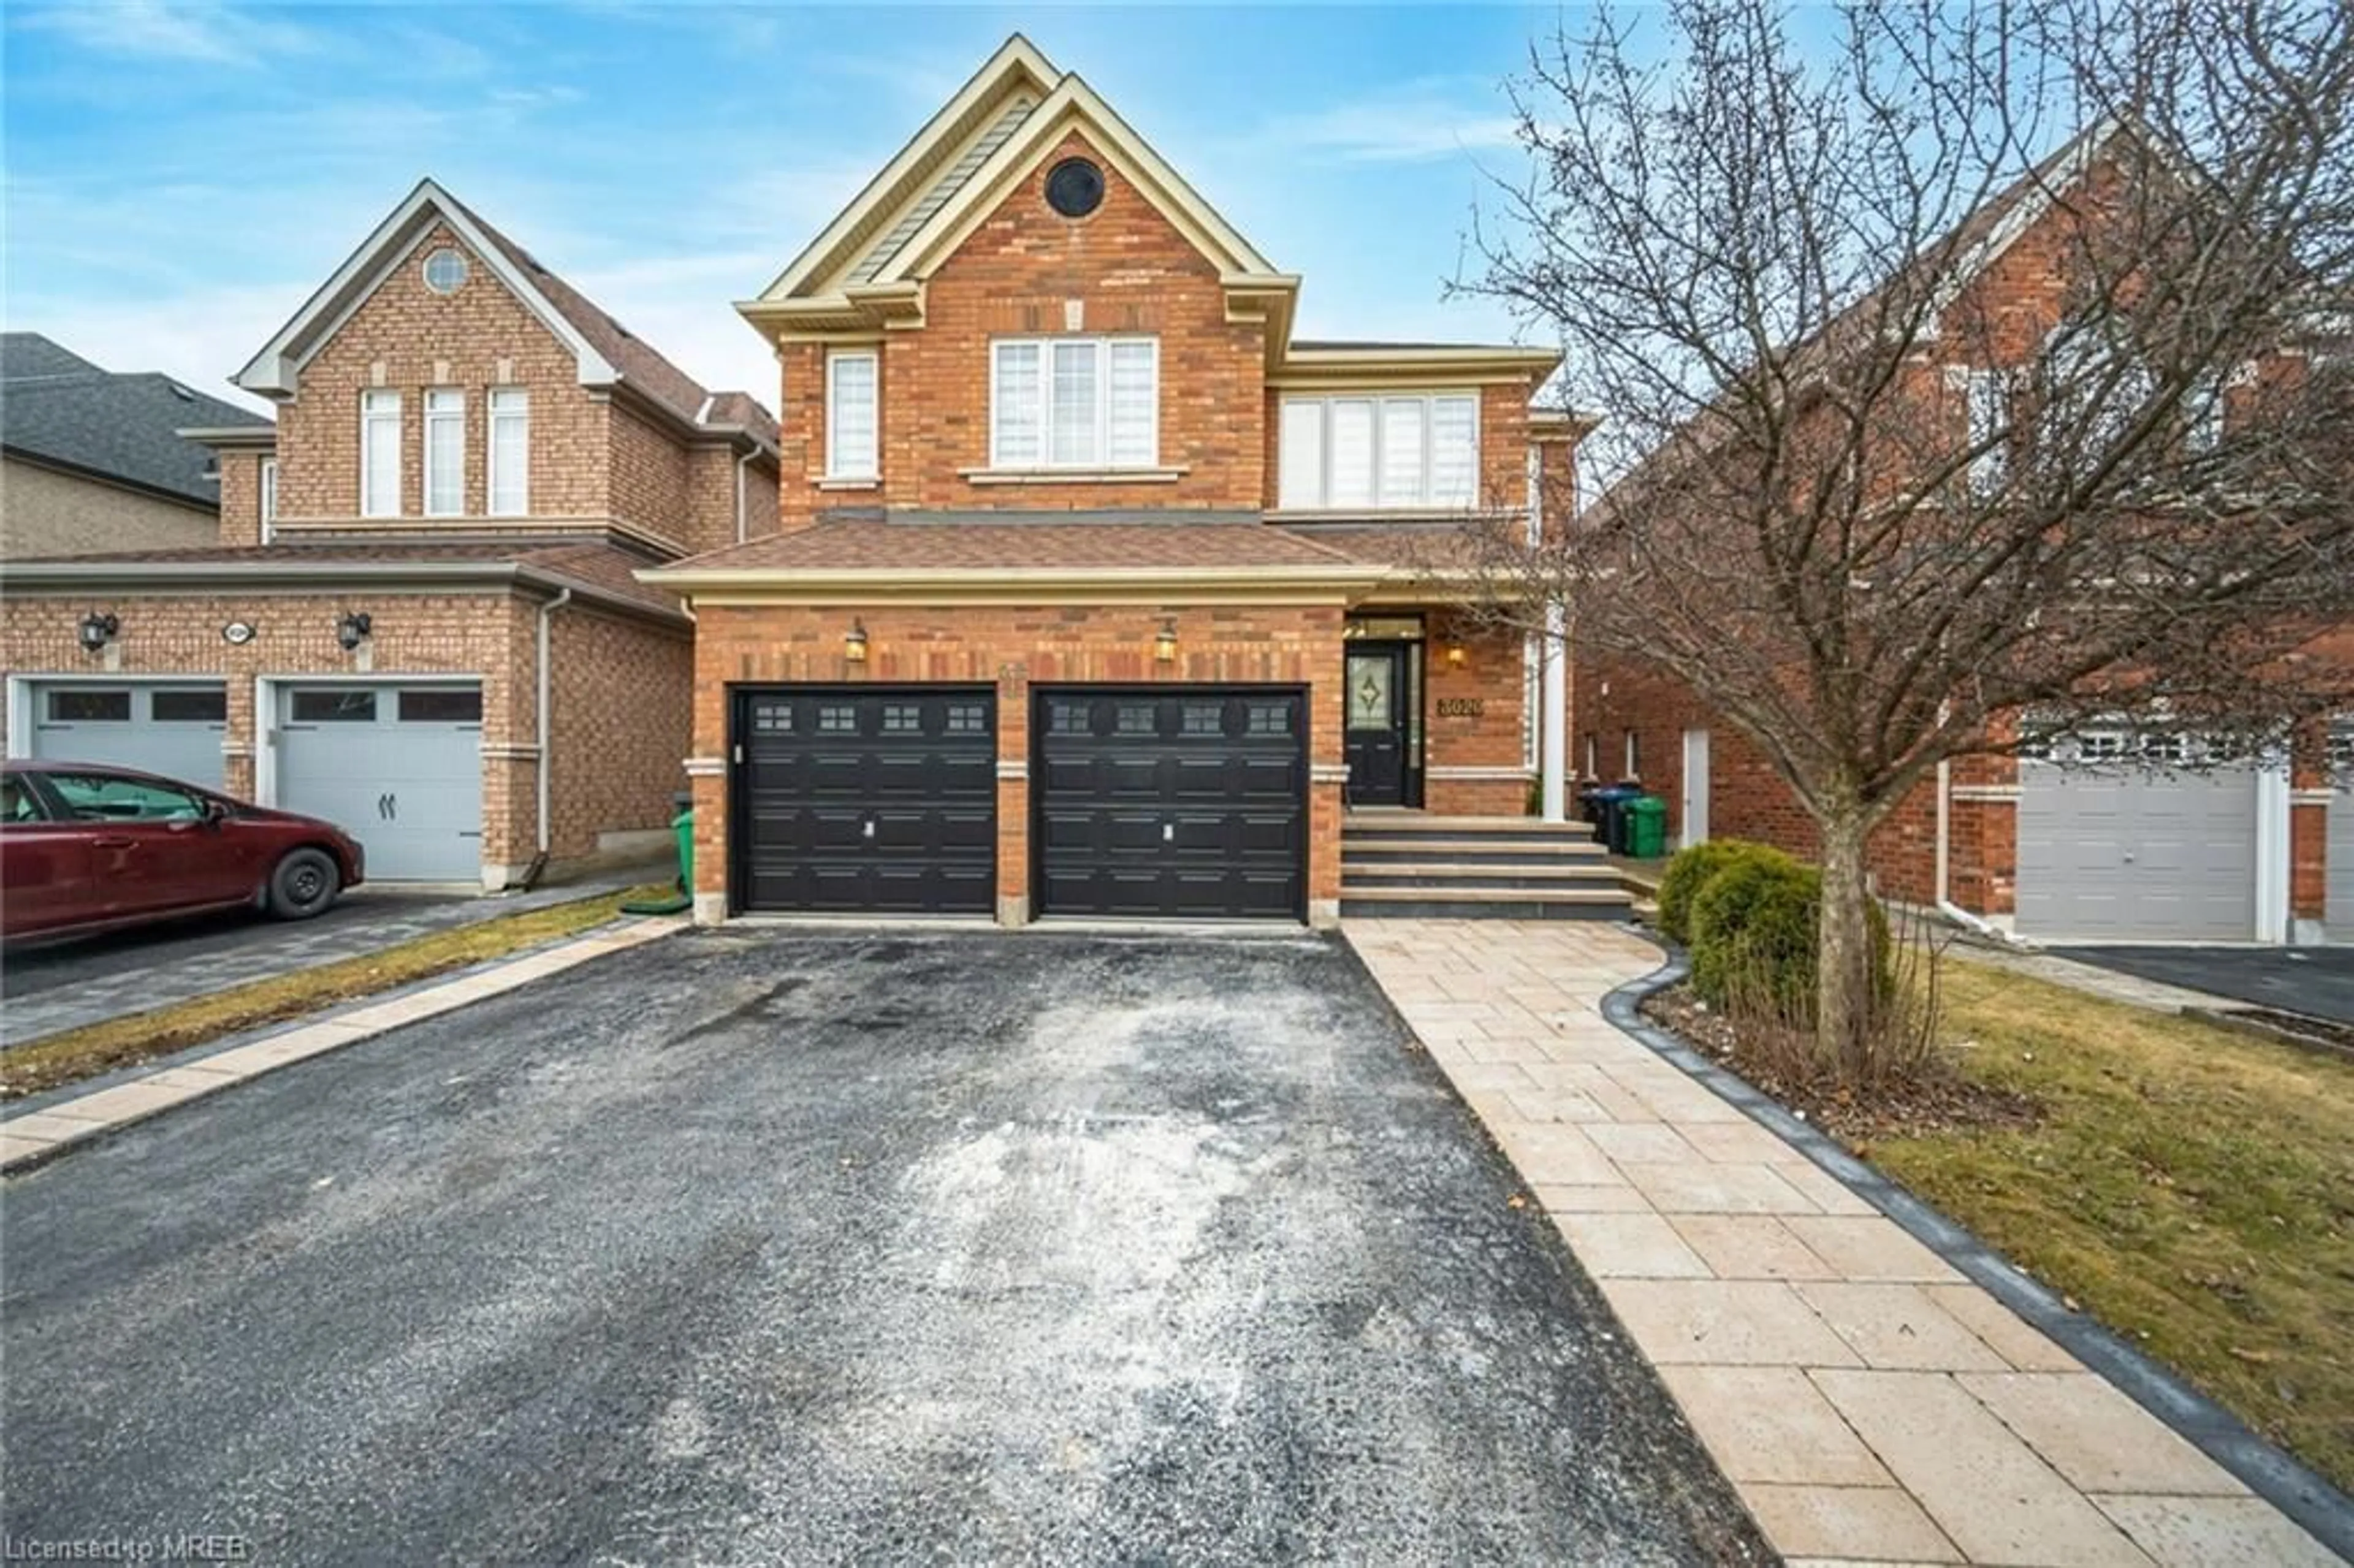 Home with brick exterior material for 3020 Hawktail Cres, Mississauga Ontario L5M 6W3